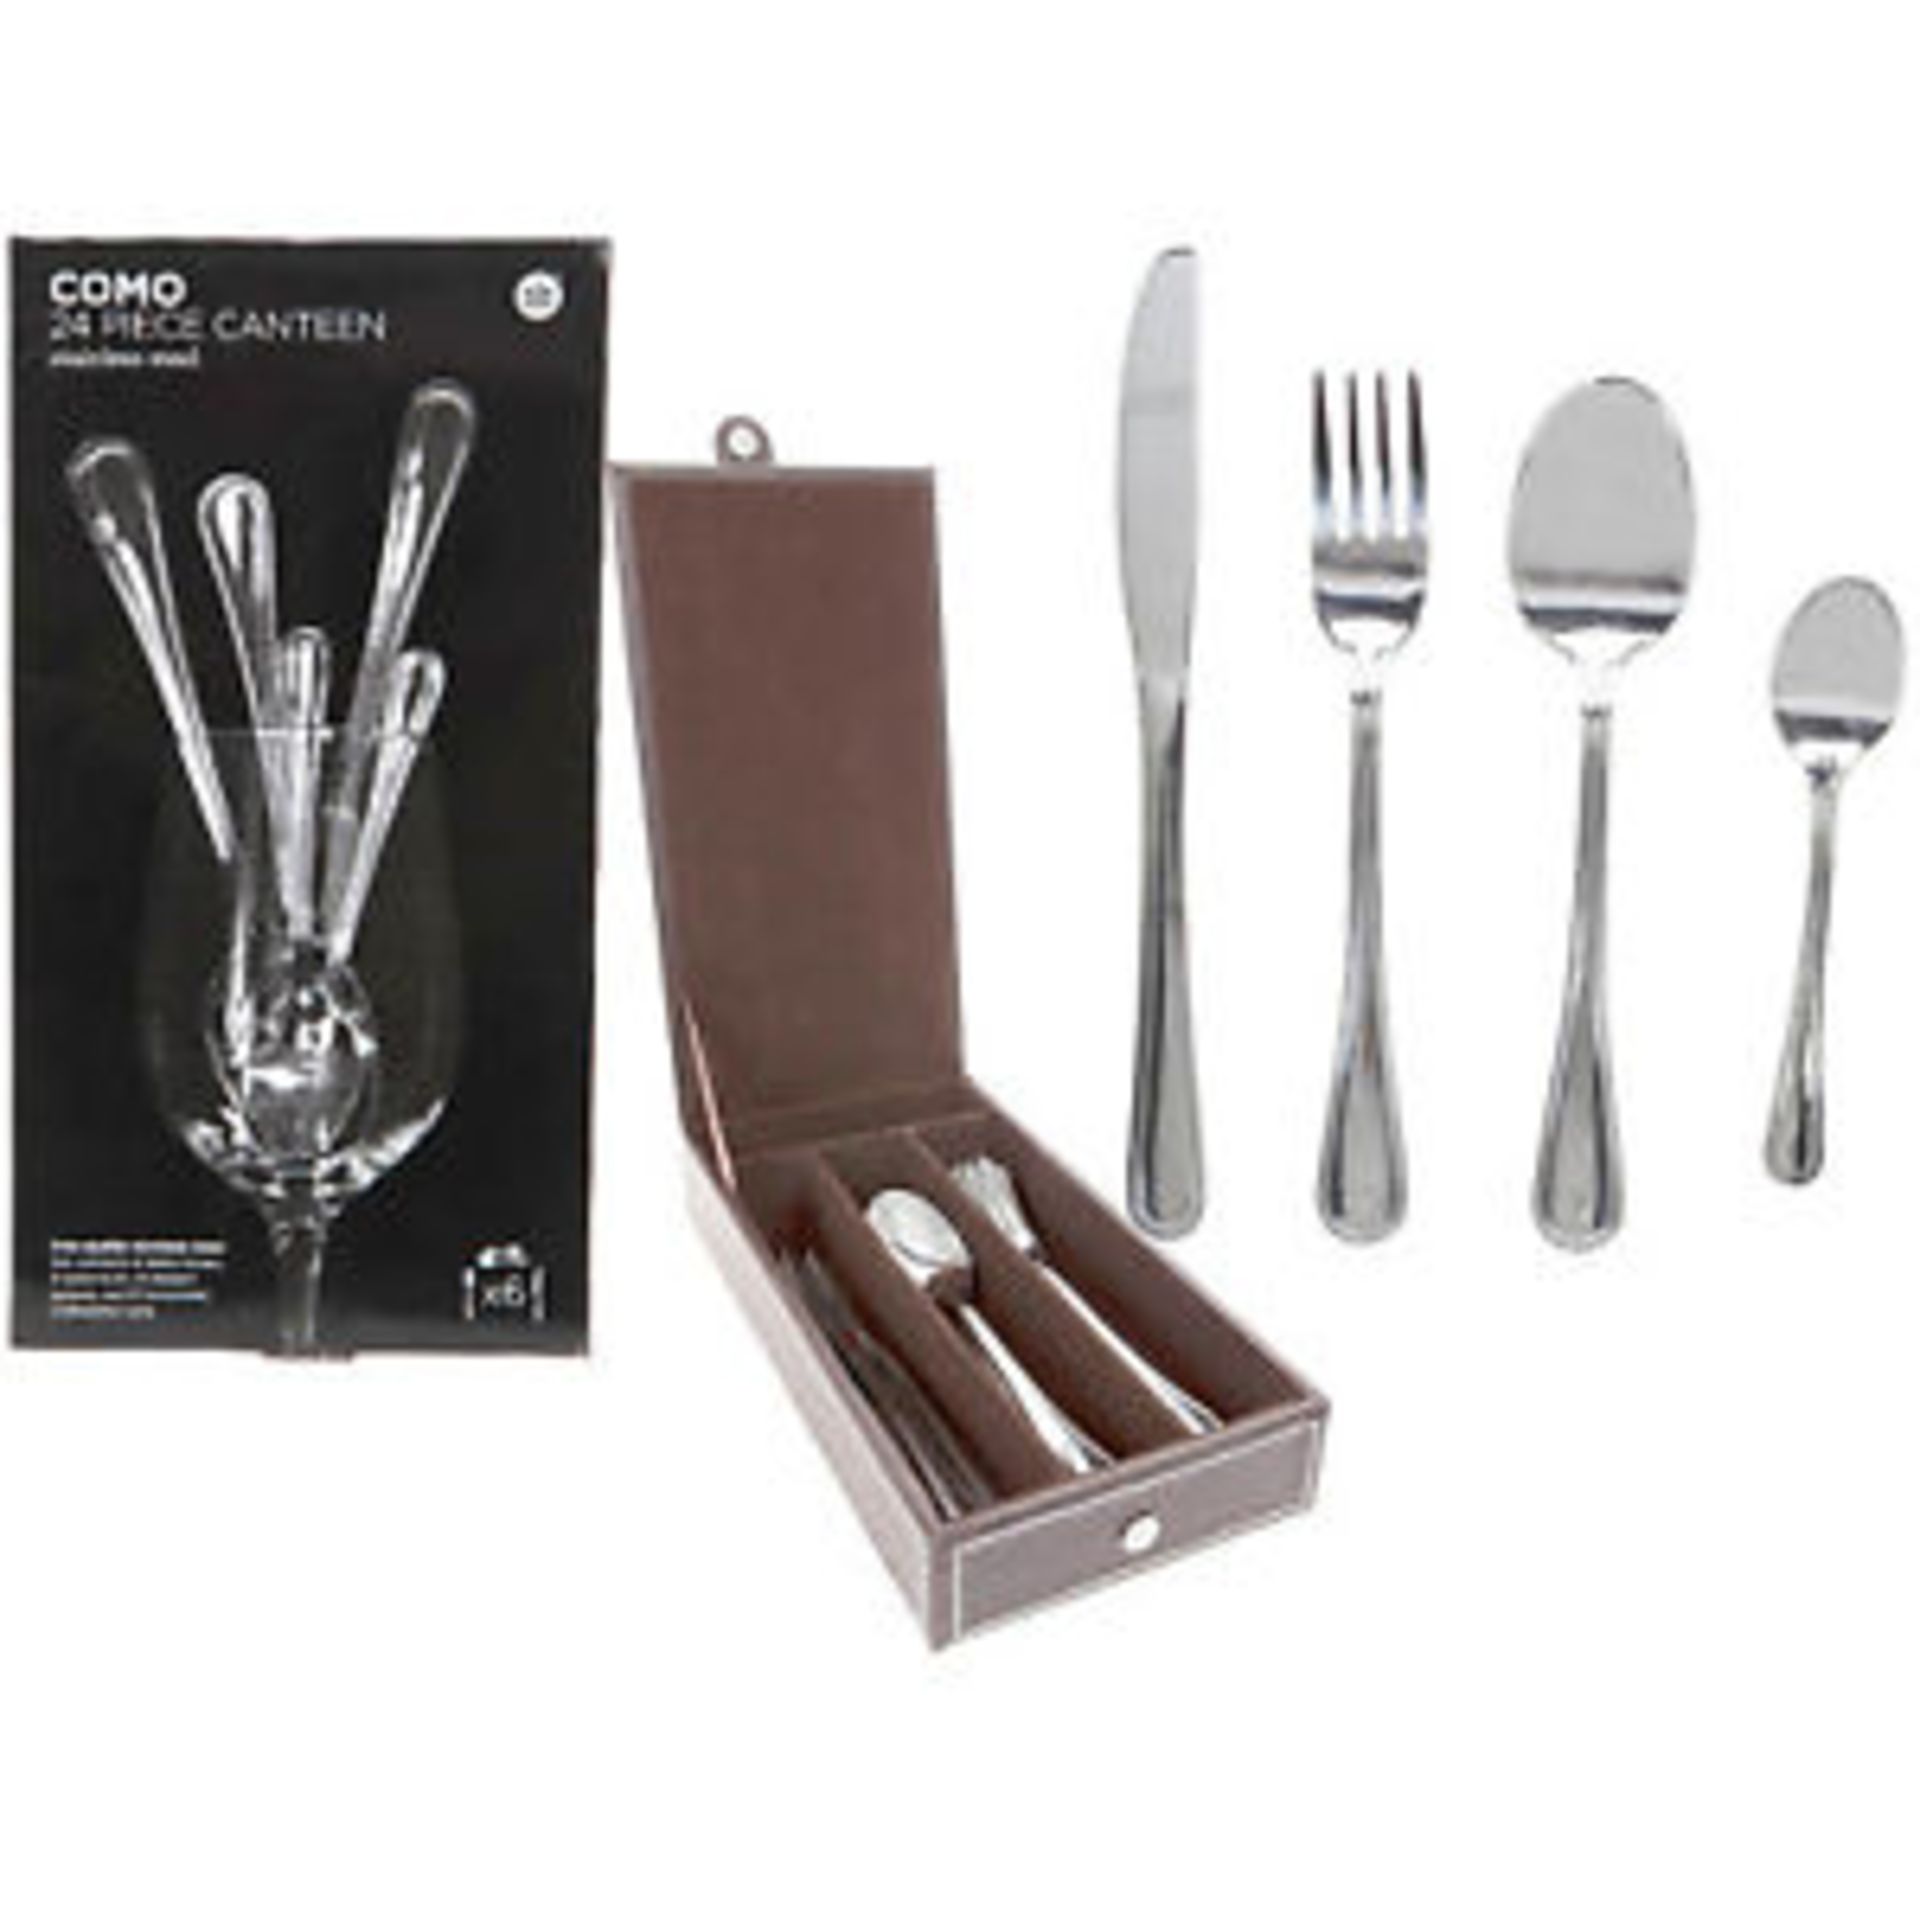 V Brand New Como 24pc Stainless Steel Cutlery Set In Case